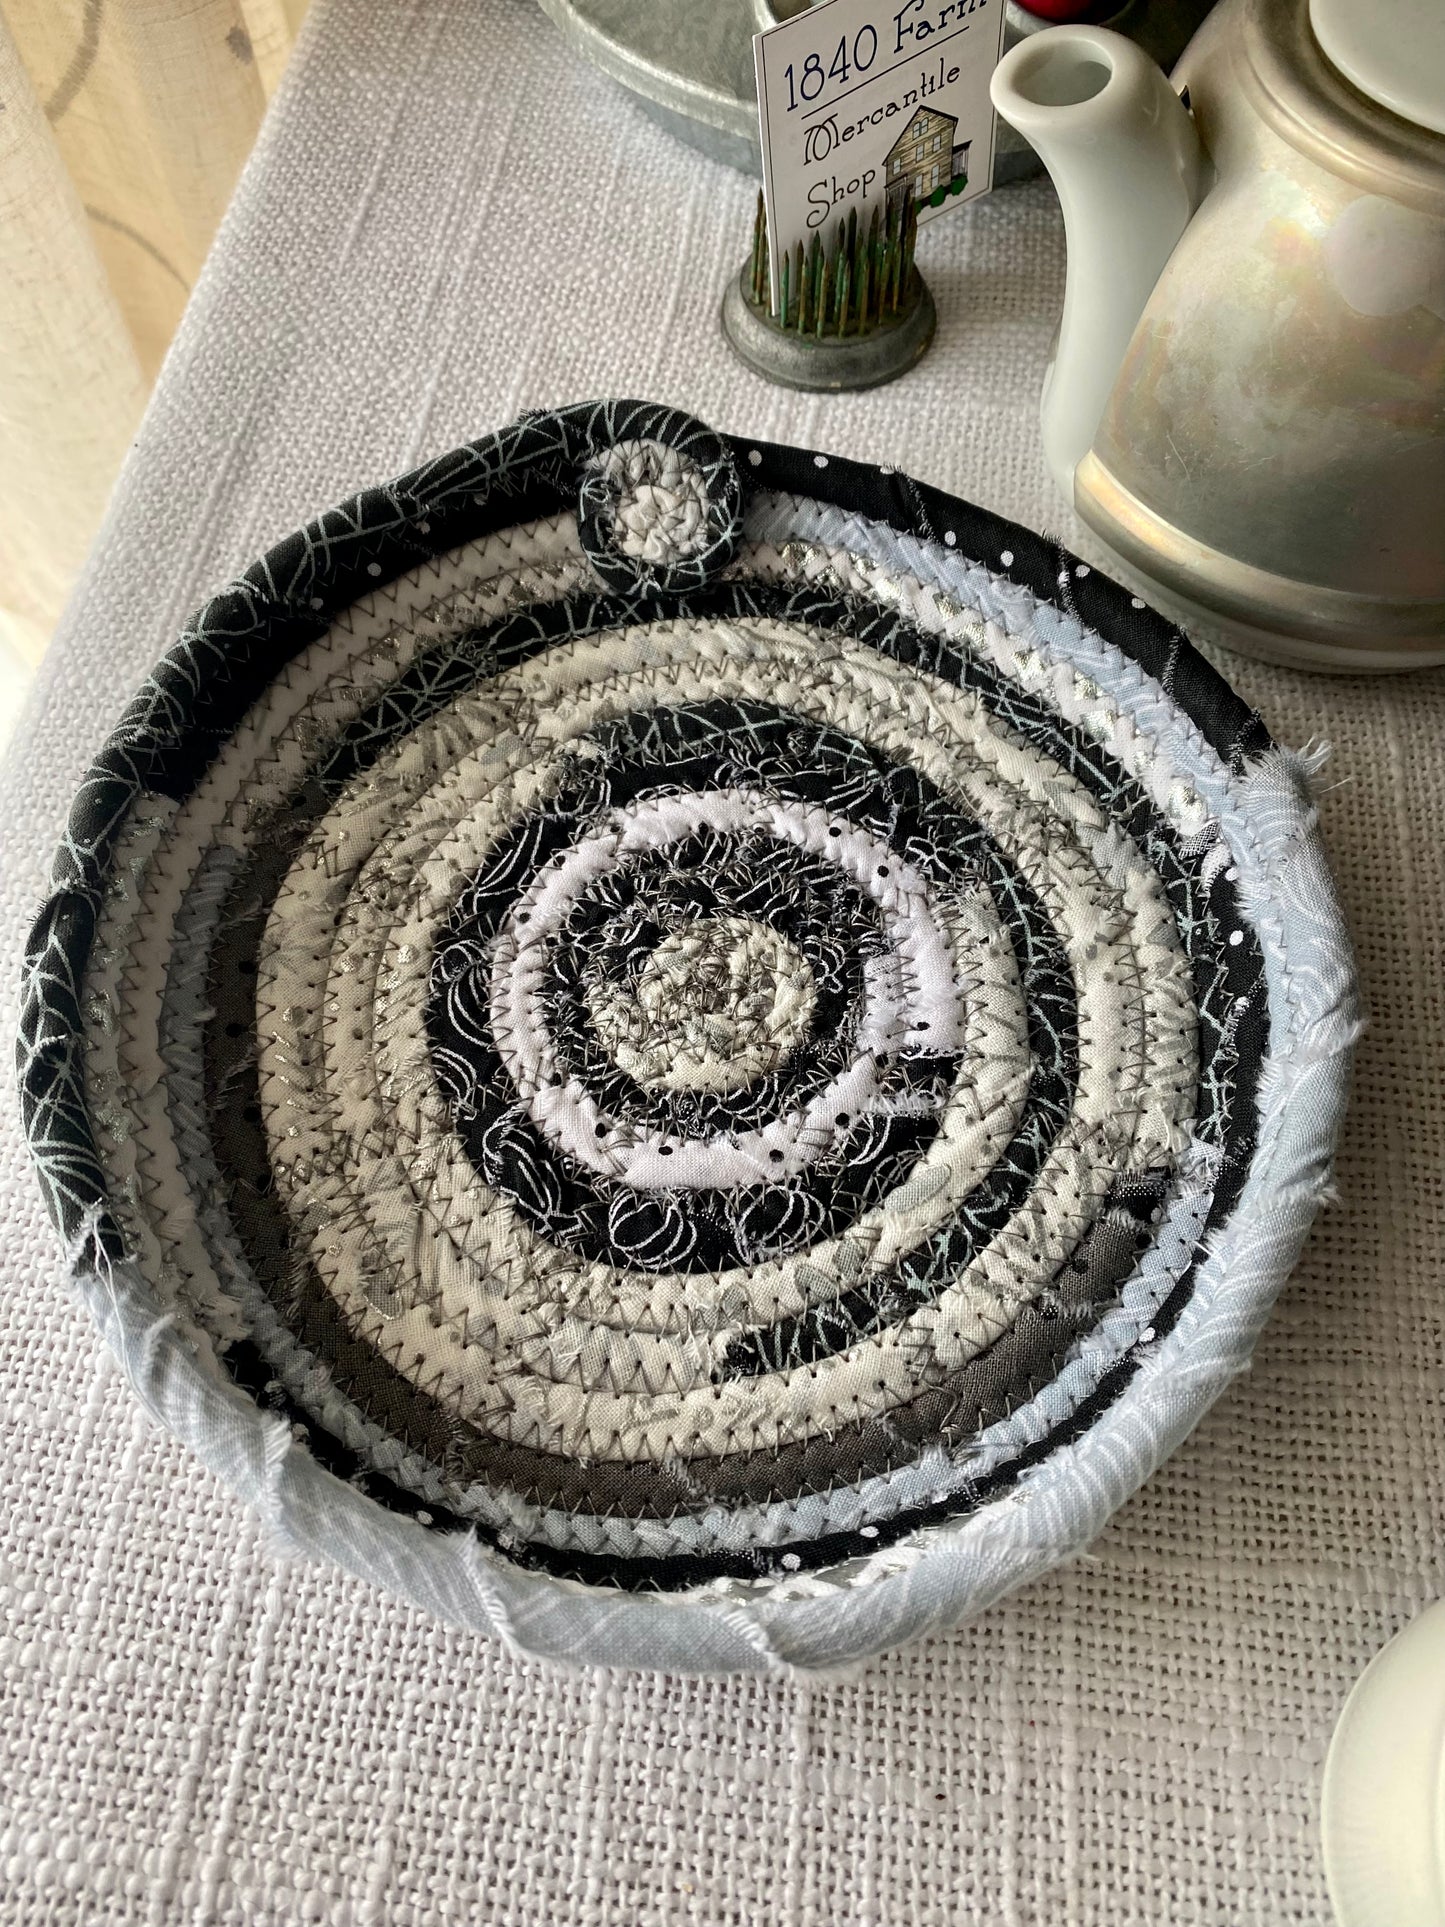 Matching set: 6” Medium Saucer Style Trivet and two Coasters